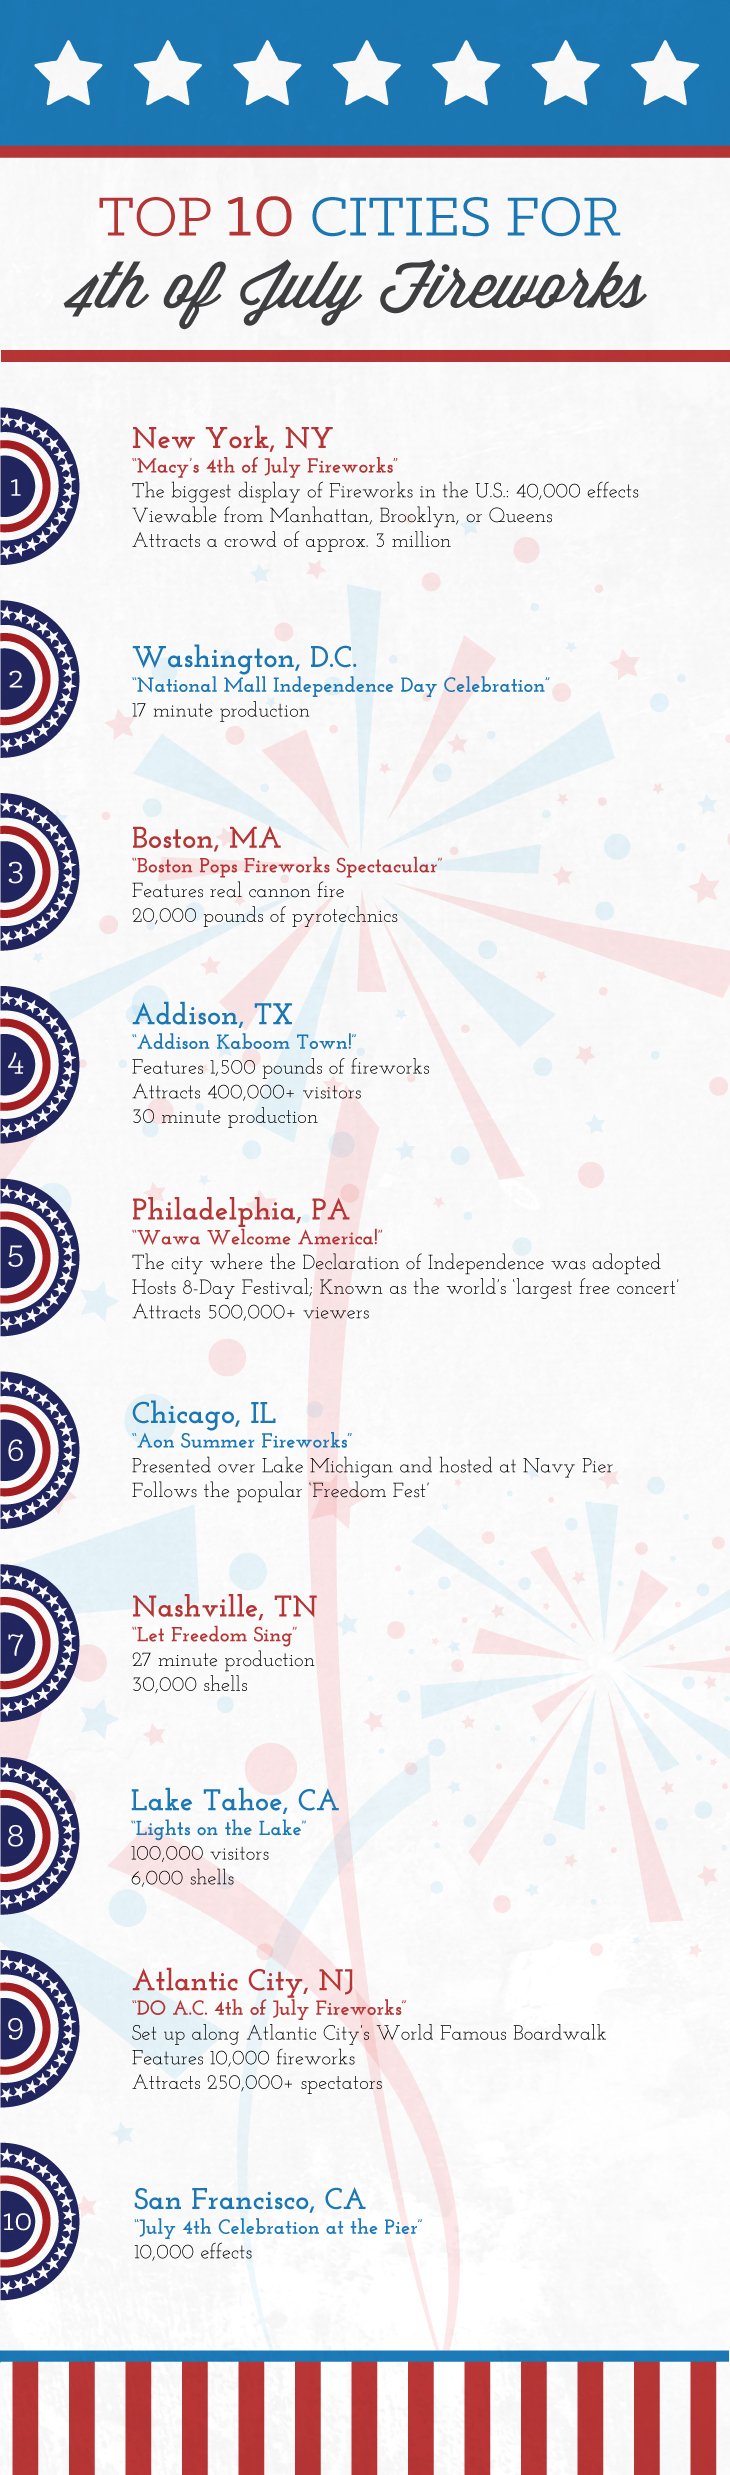 Top 10 cities for 4th of July fireworks